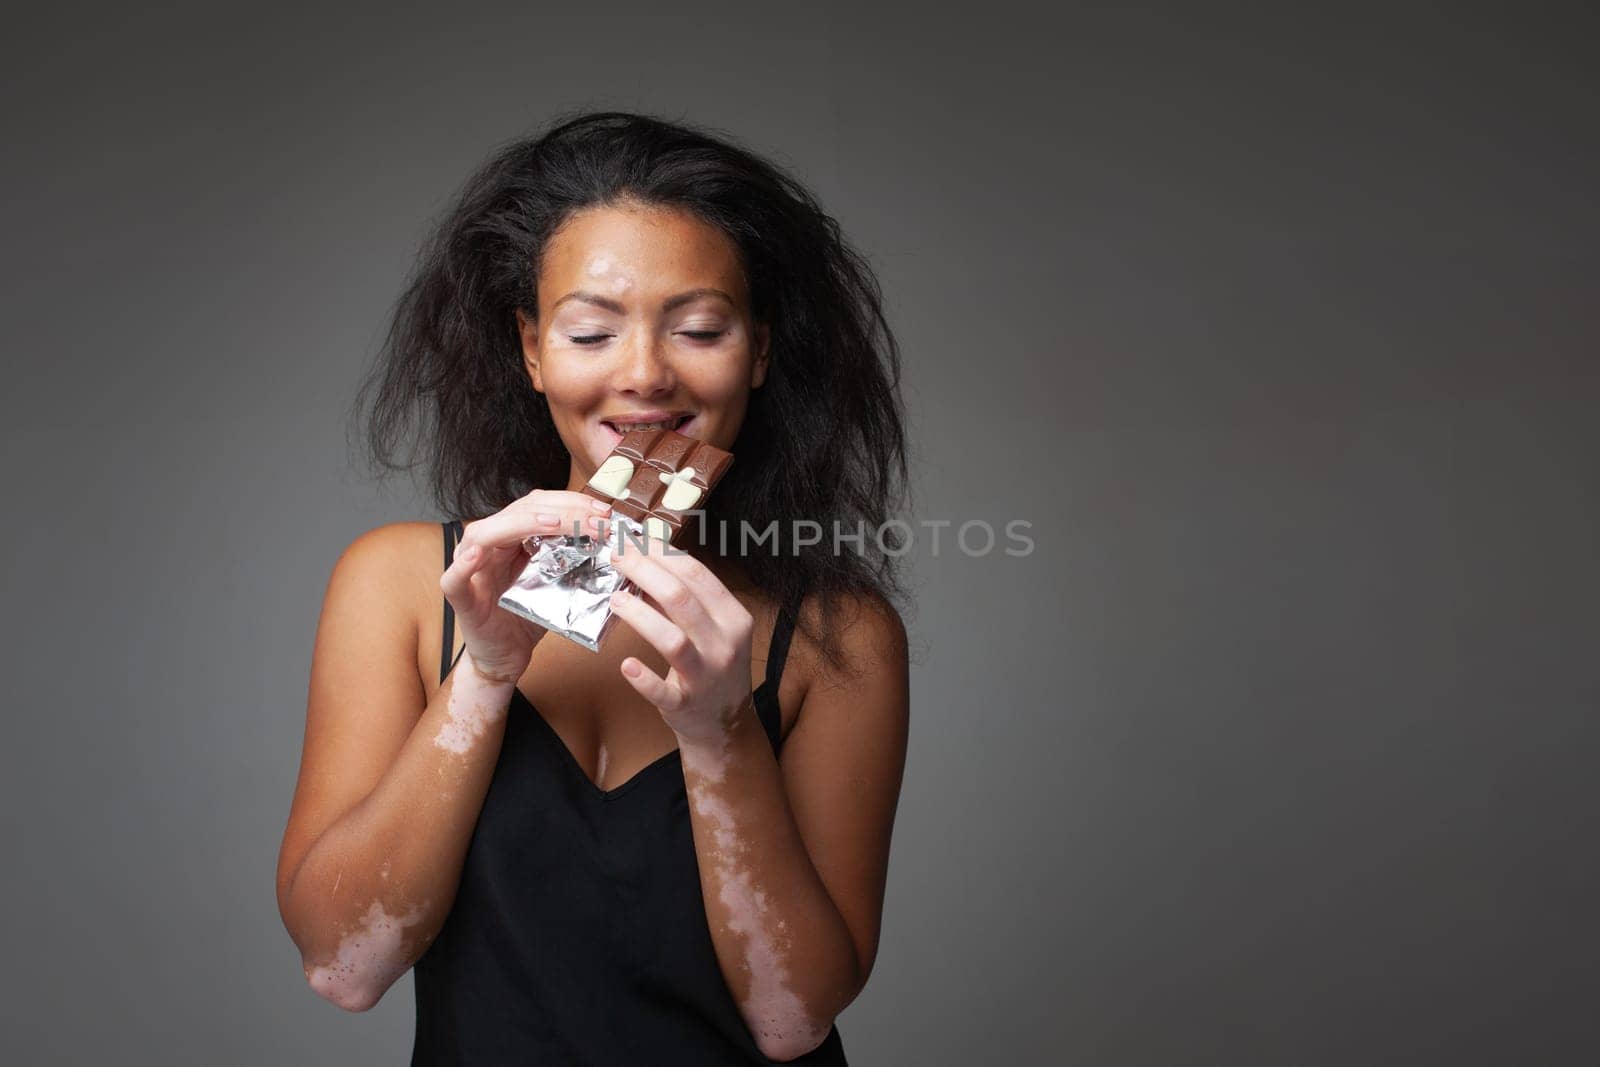 Smiling African American woman with Vitiligo disease eating chocolate. Beautiful young lady with dark hair having sweet food against gray background. Black lady with skin problem.